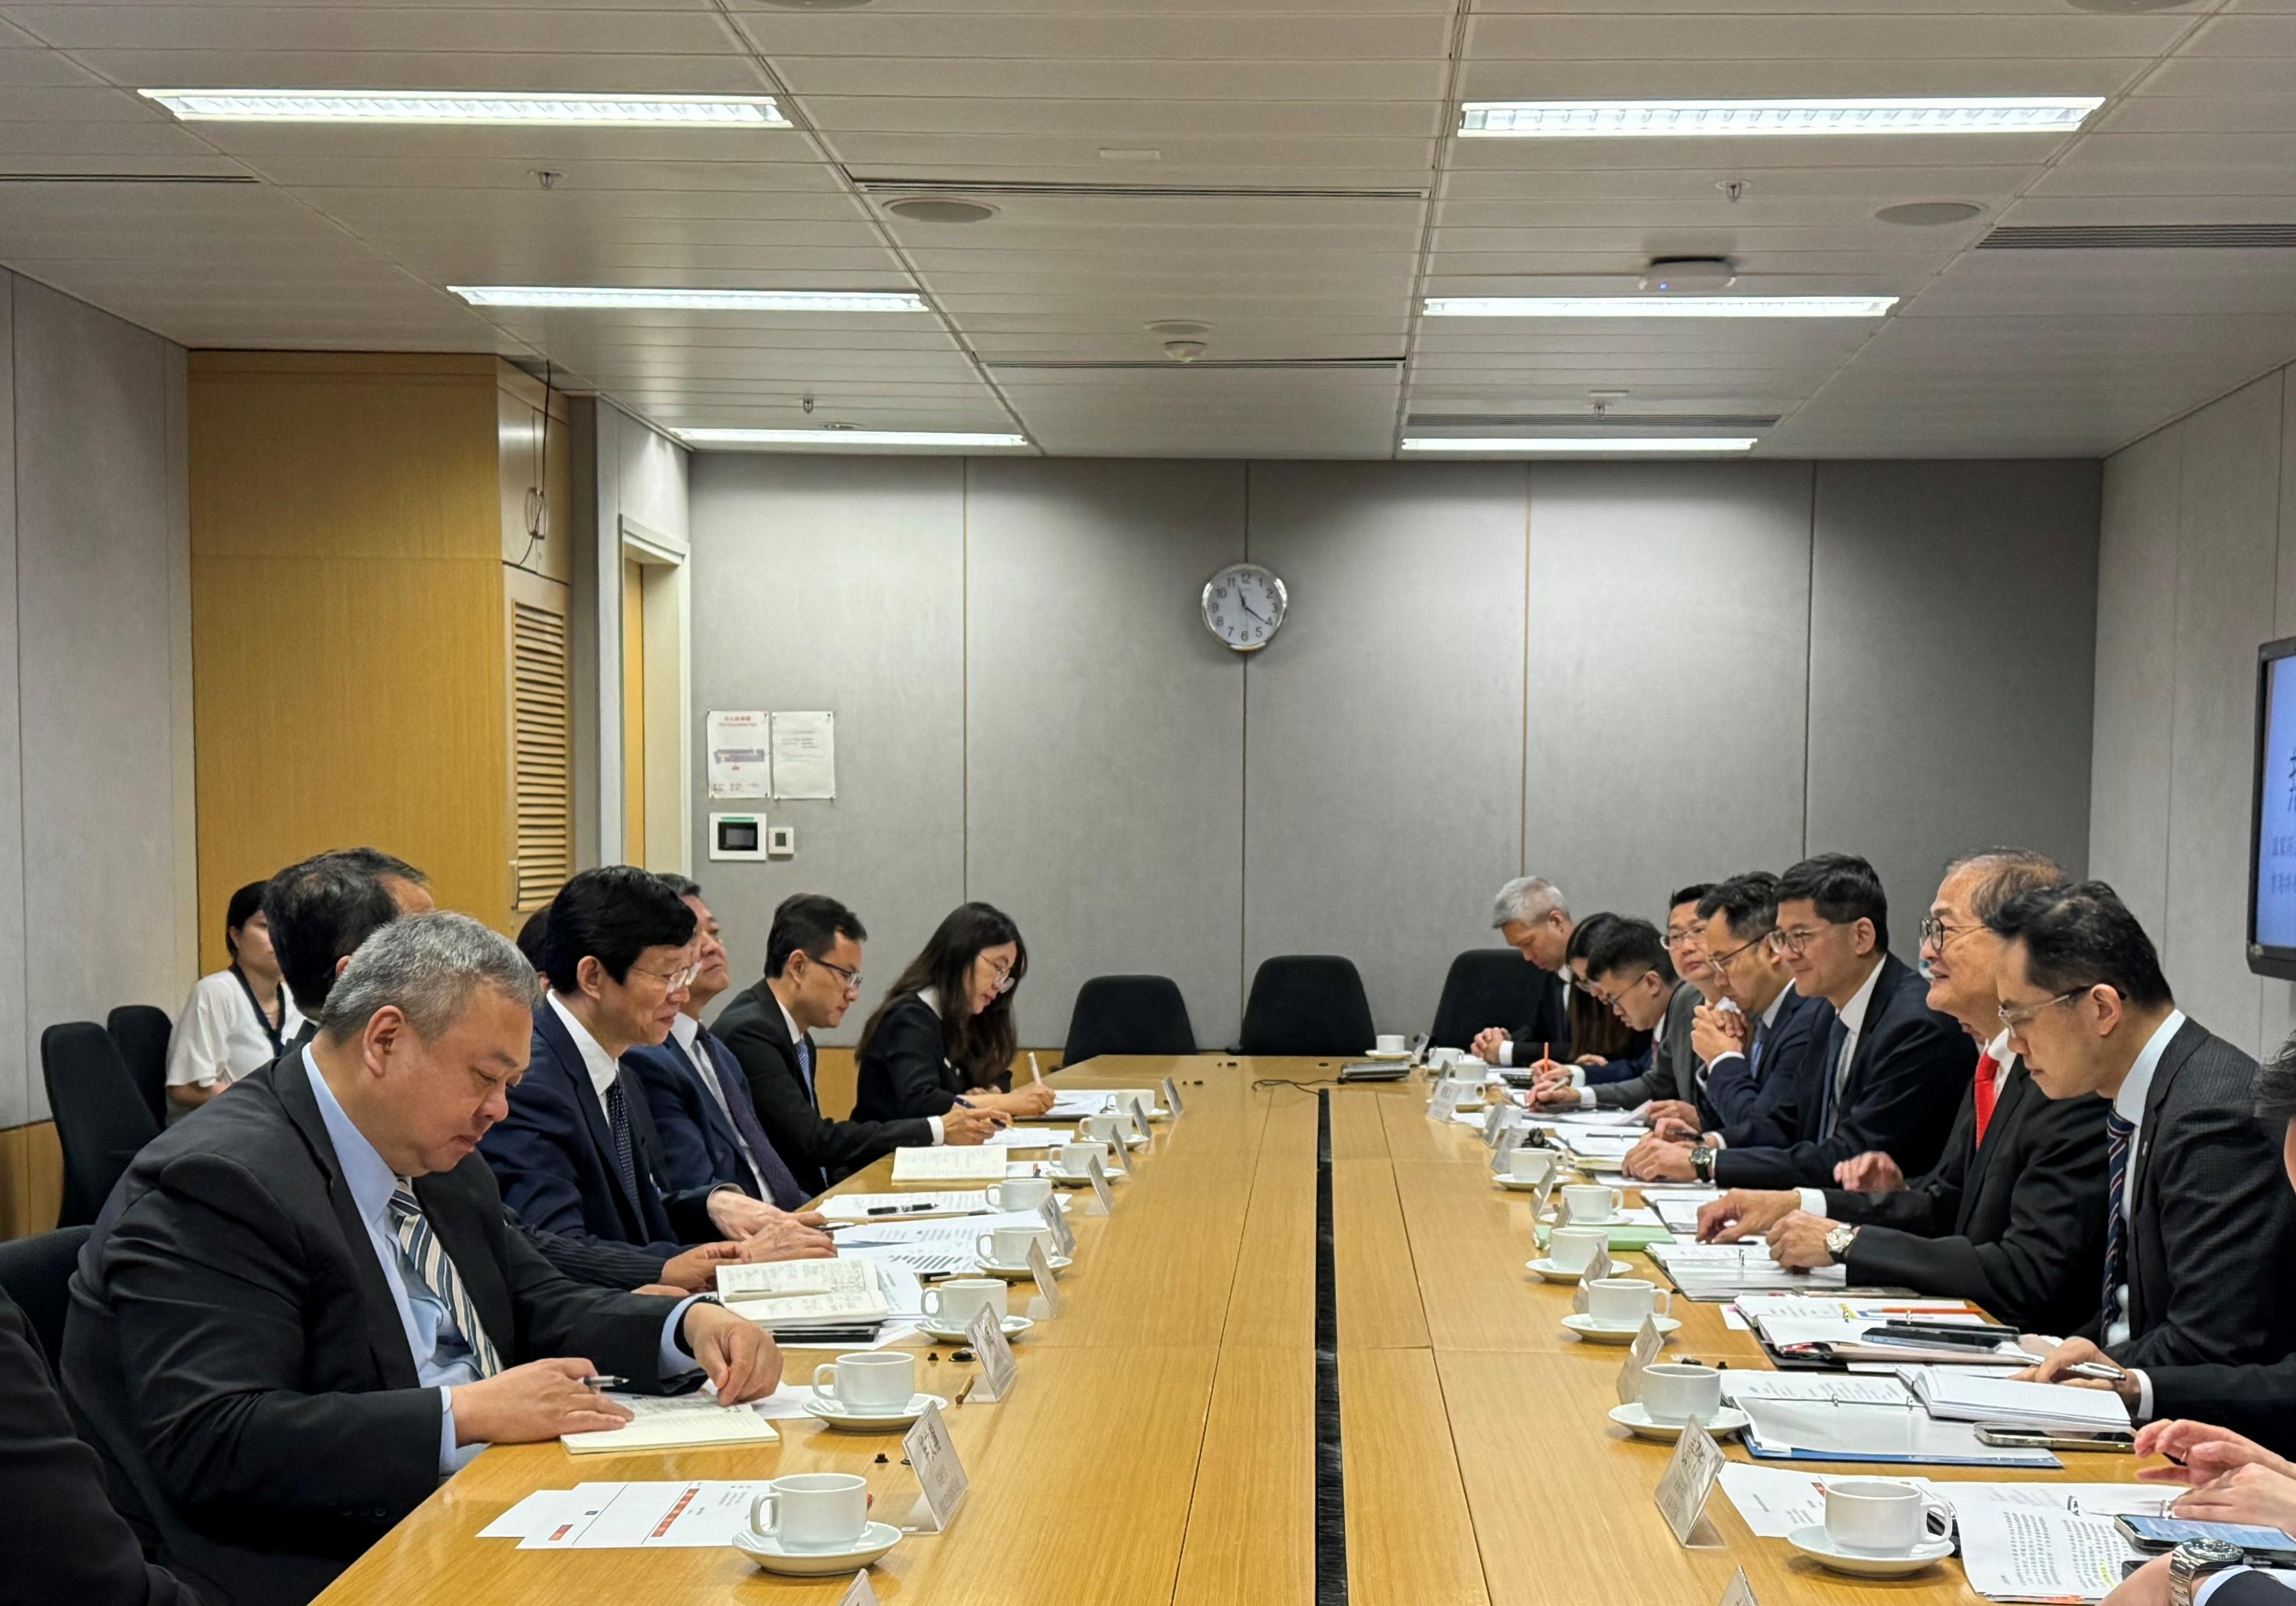 The Secretary for Health, Professor Lo Chung-mau (second right), meets with a delegation led by the Commissioner of the National Medical Products Administration, Mr Li Li (third left), today (May 8), with the Director of Health, Dr Ronald Lam (first right), and the Chief Executive of the Hospital Authority, Dr Tony Ko (third right), in attendance.